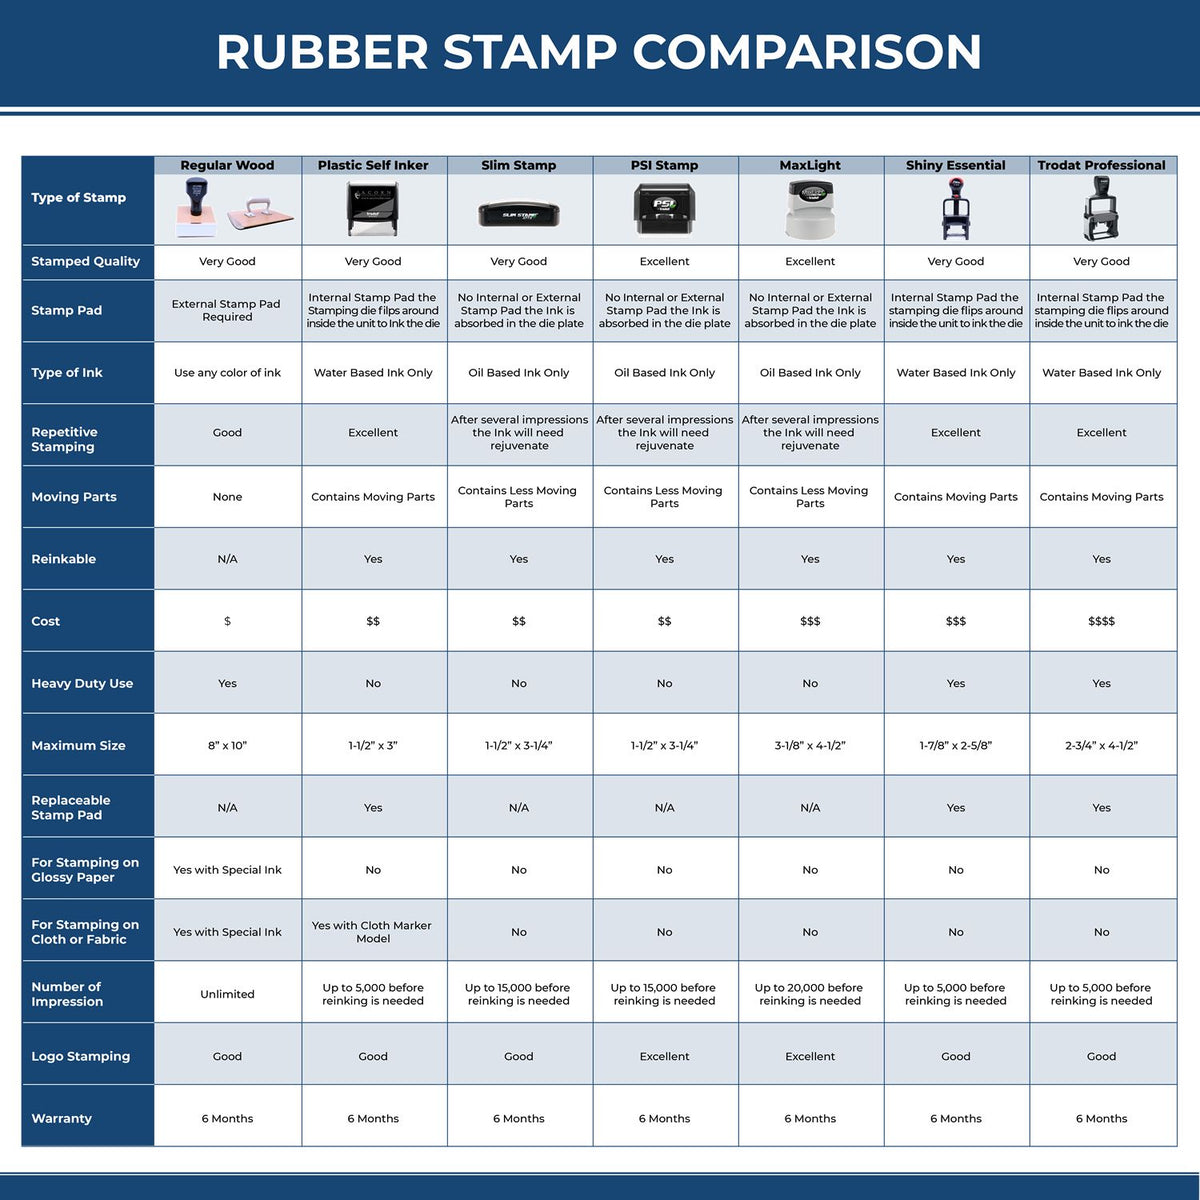 A comparison chart for the different types of mount models available for the Premium MaxLight Pre-Inked Kentucky Engineering Stamp.